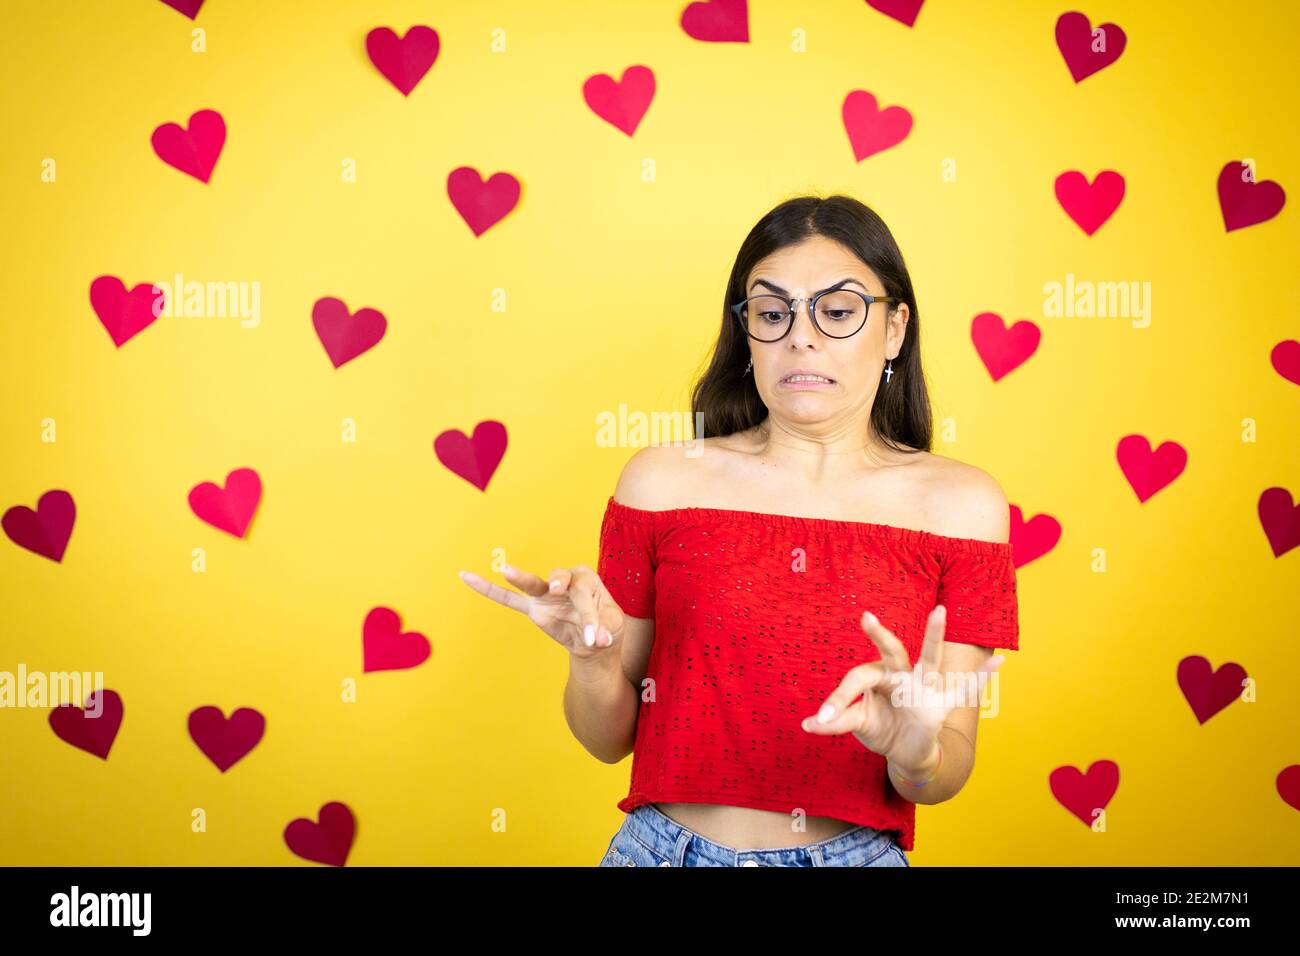 Young beautiful woman over yellow background with red hearts disgusted expression, displeased and fearful doing disgust face because aversion reaction Stock Photo